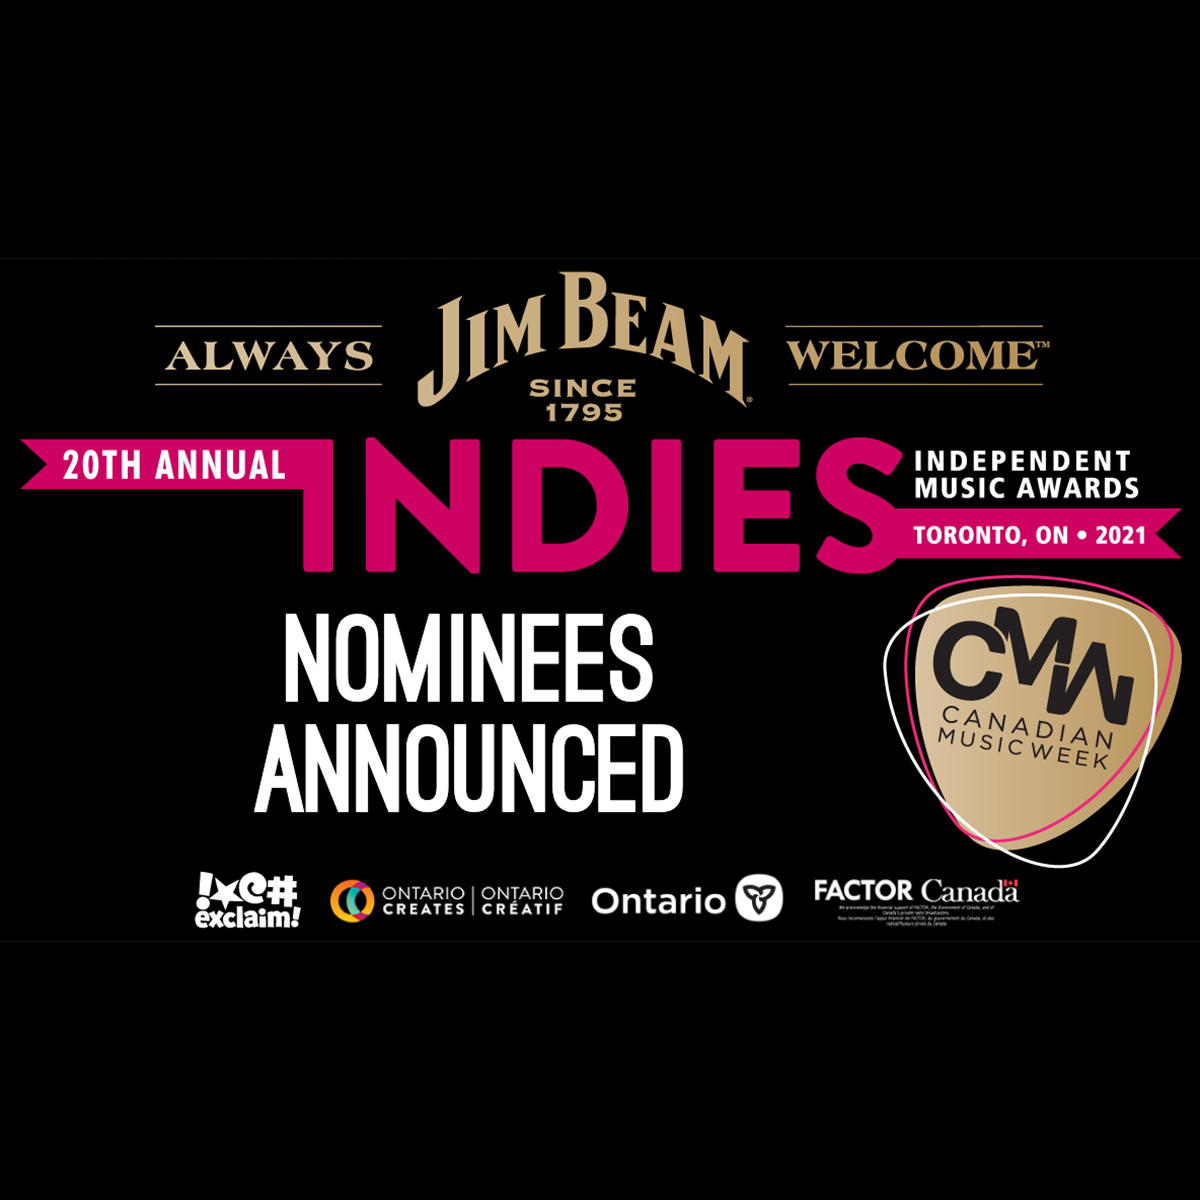 Canadian Music Week Announces Nominees for the 20th INDIE Awards